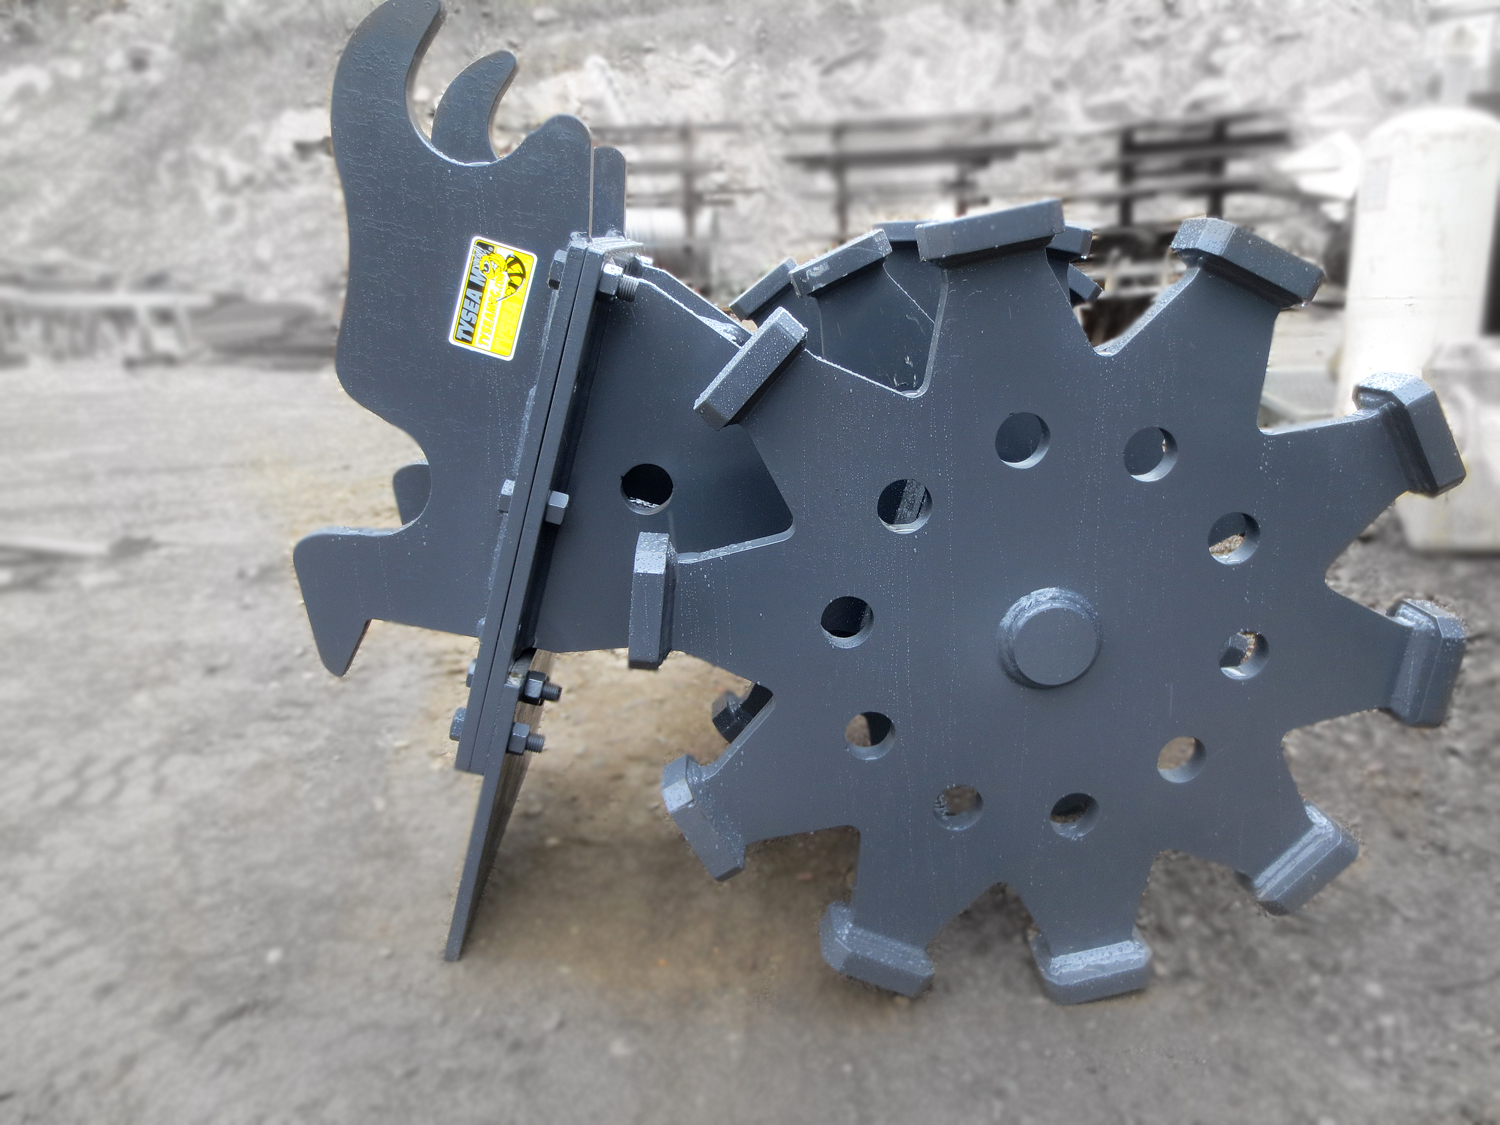 Excavator compaction wheel or sheepsfoot attachments